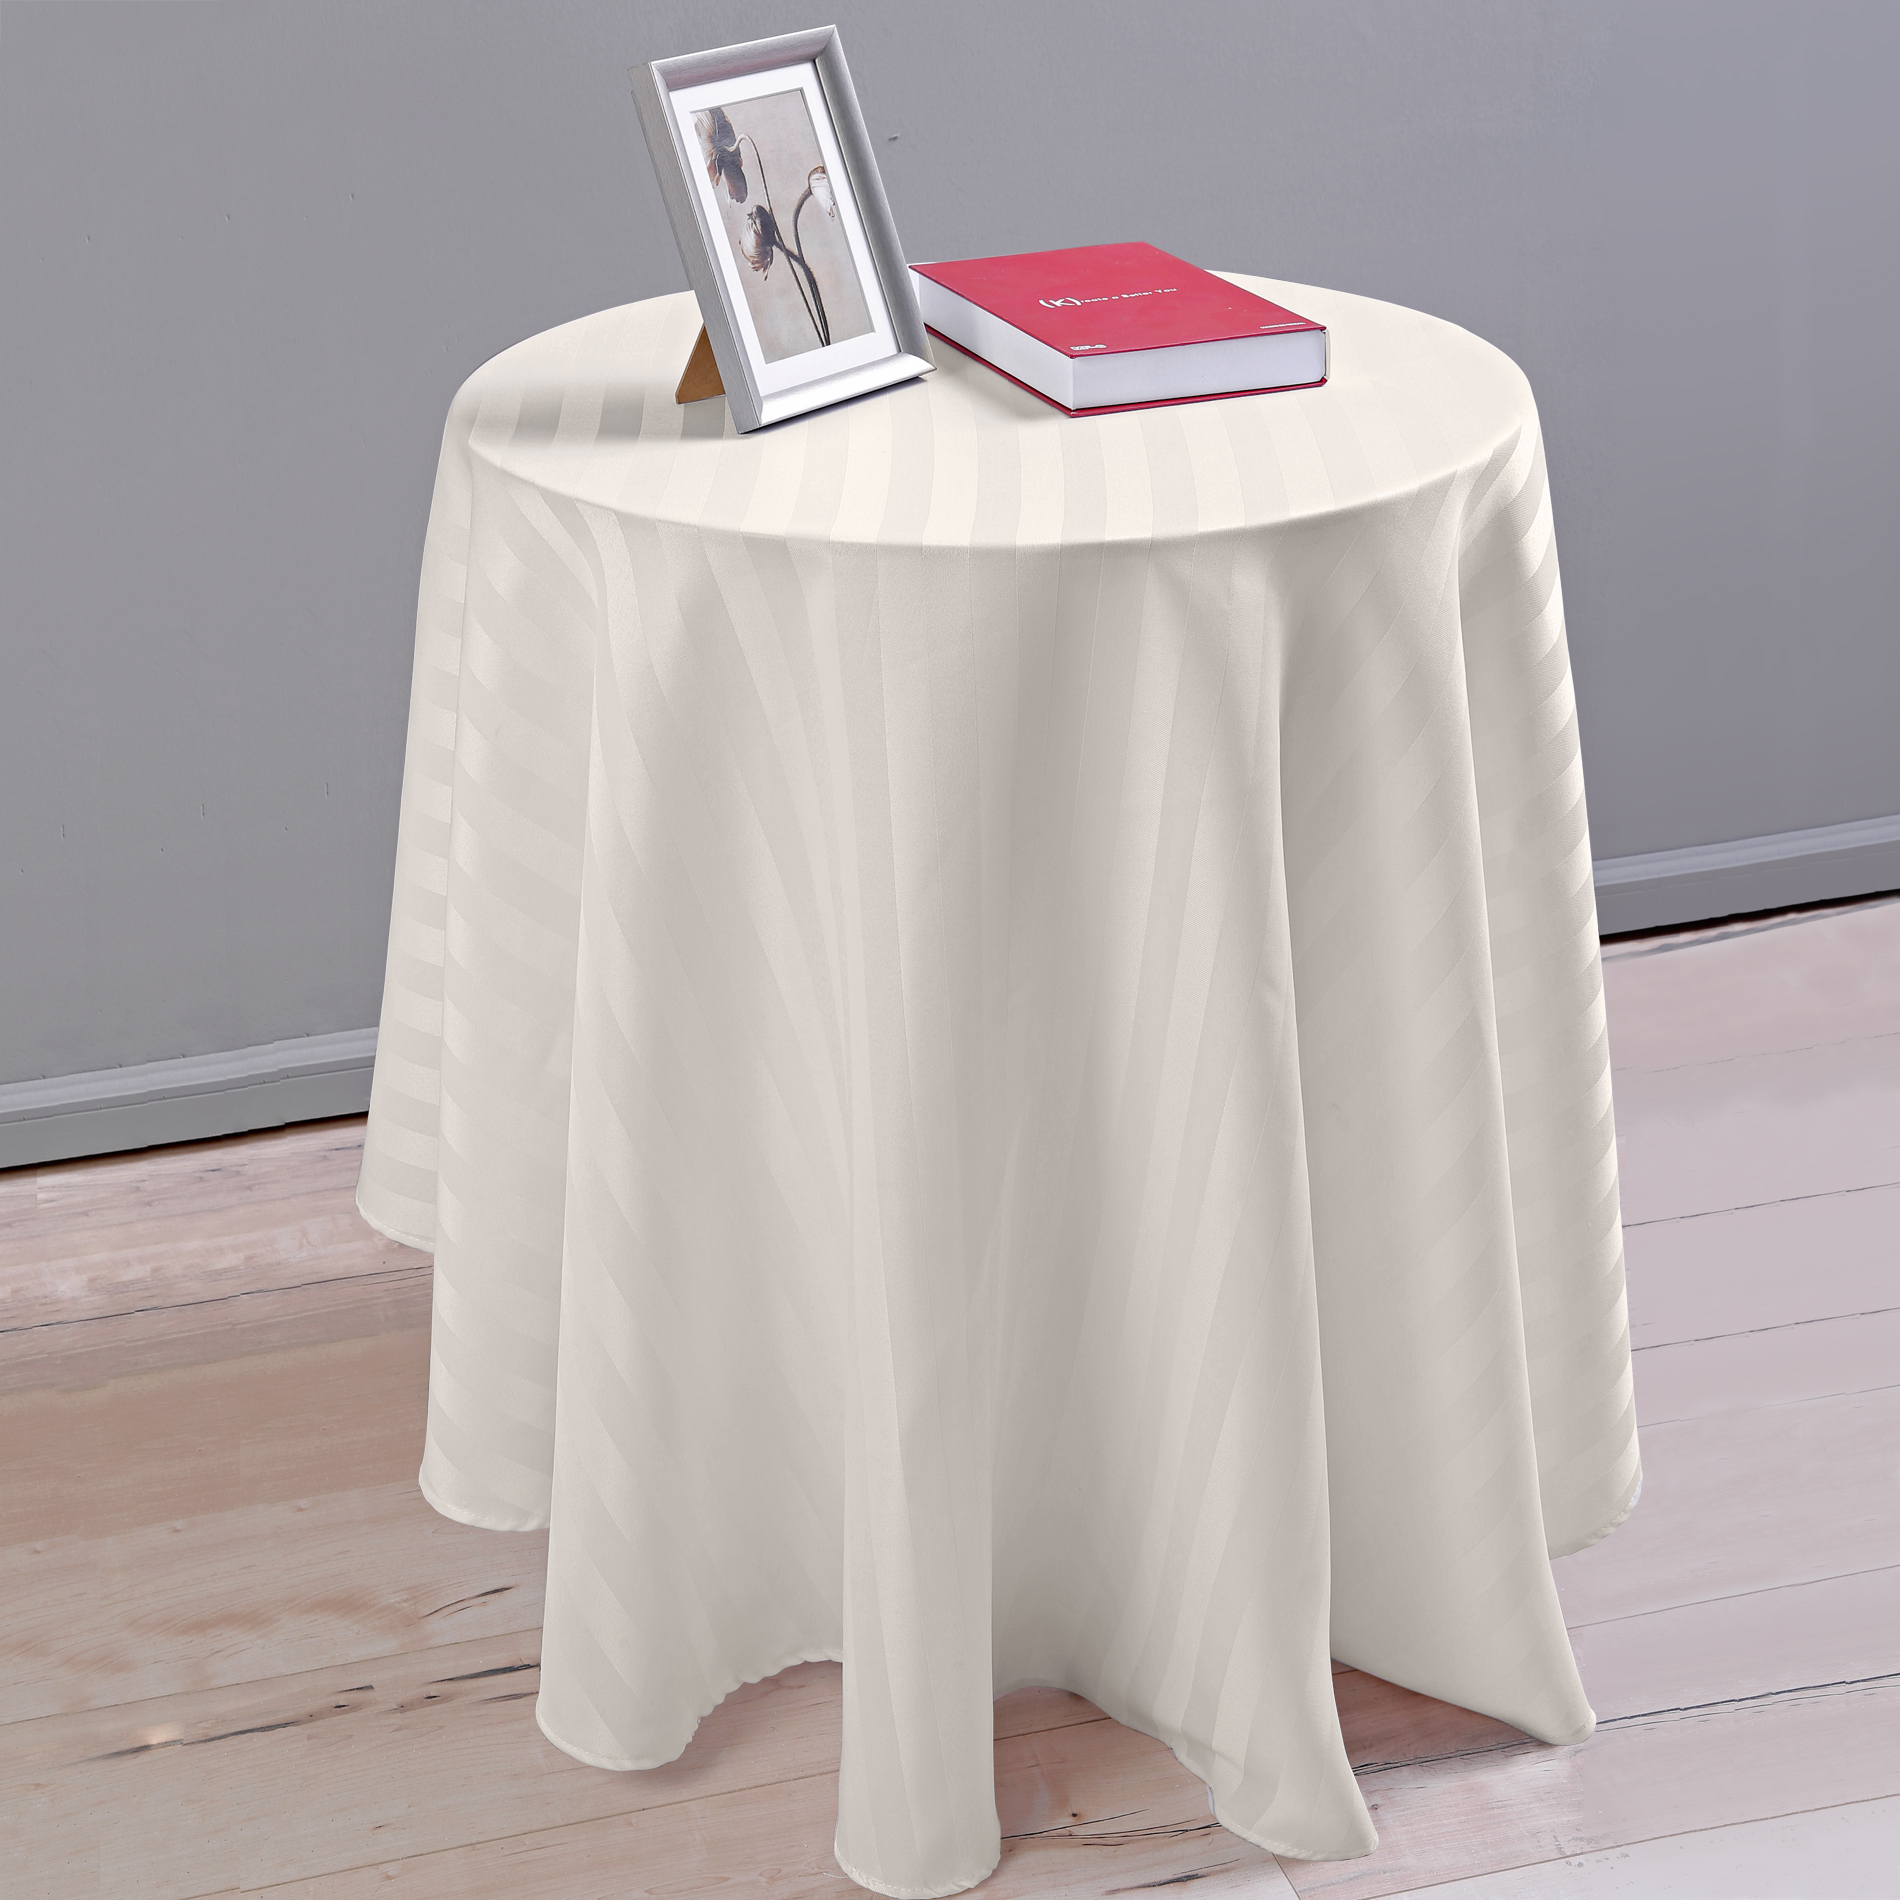 Essential Home Satin Striped Round Jacquard Tablecloth - Ivory